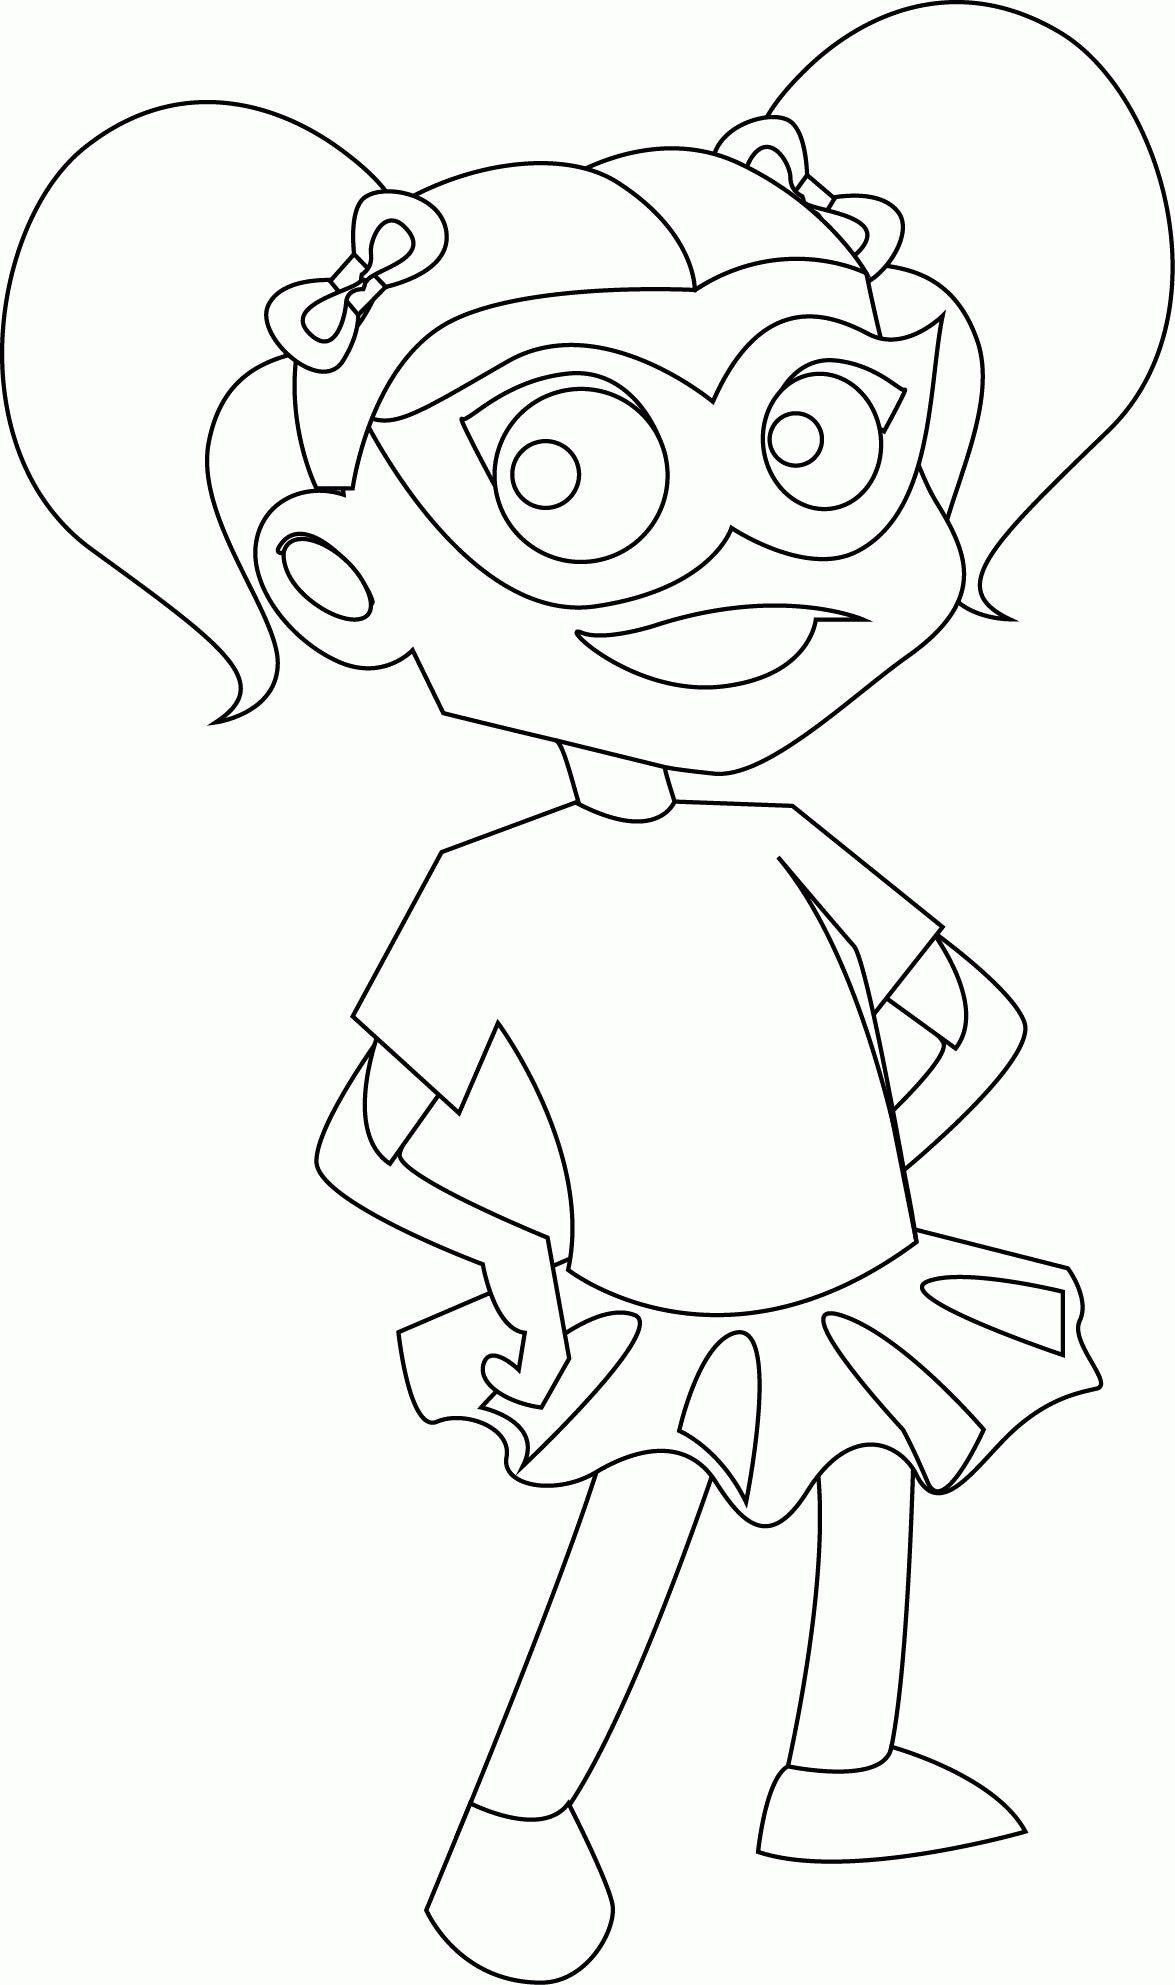 963 Cute Baby Superhero Coloring Pages with Animal character